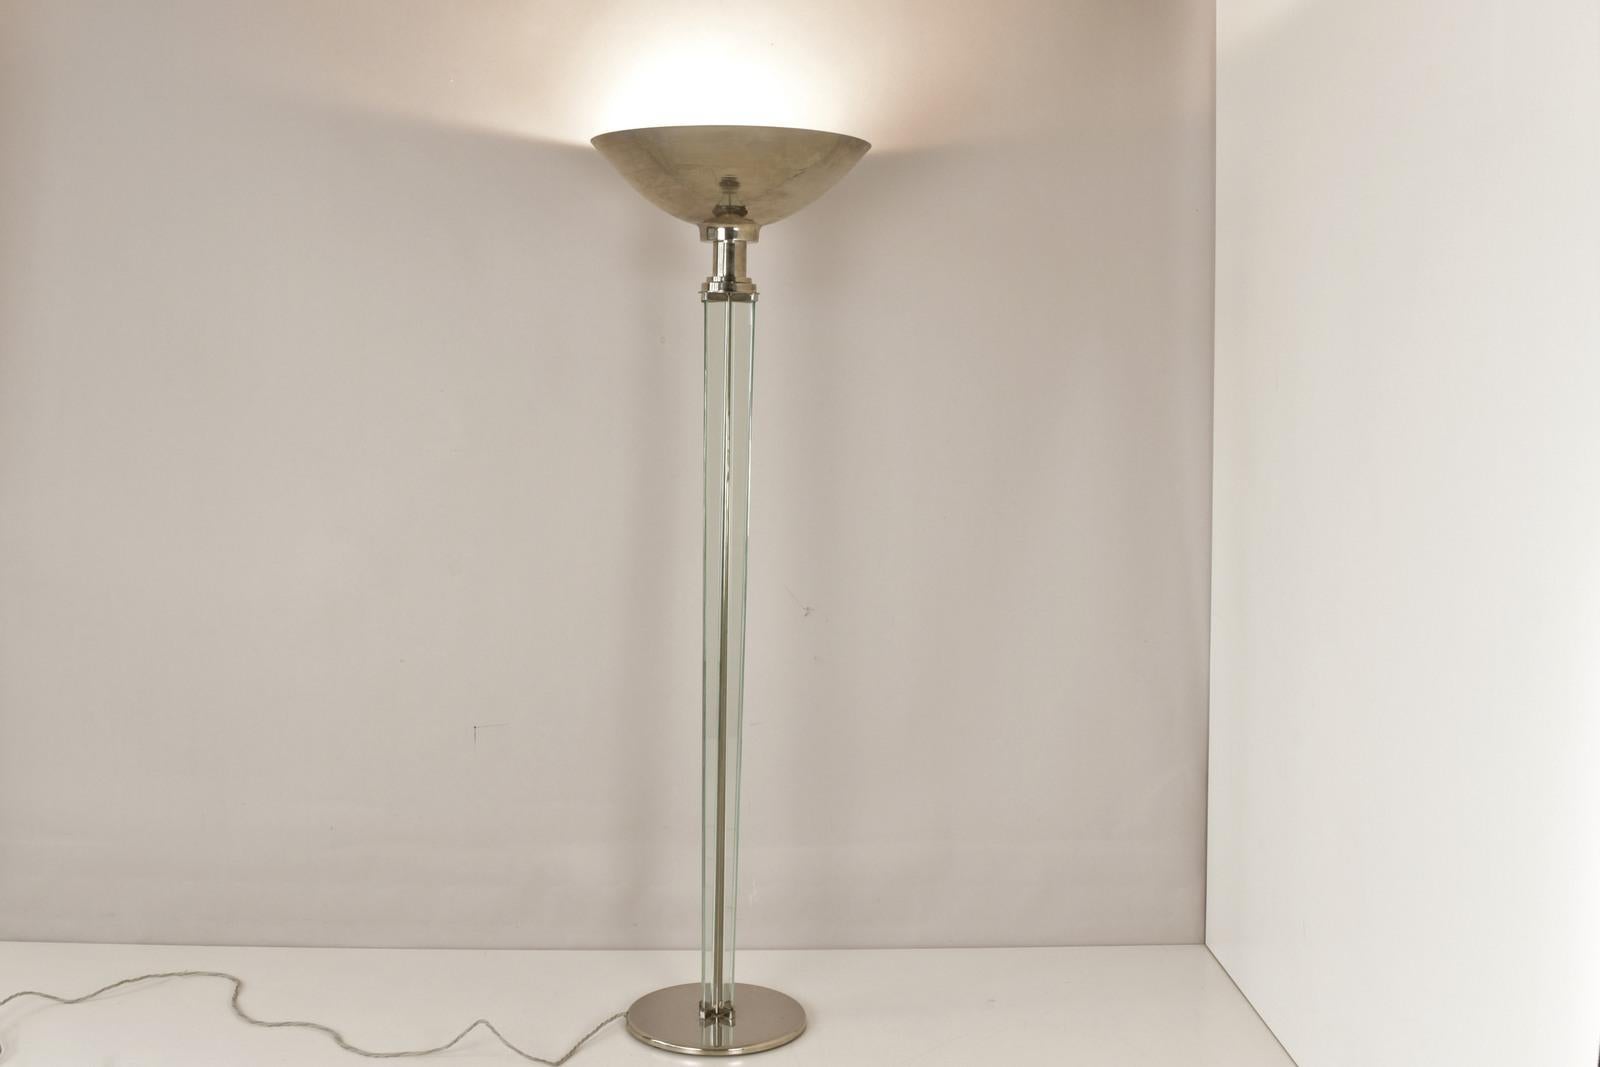 H 171 cm W 55 cm D 55 cm

Material: Polished and nickel-plated brass, cut and polished clear glass, E 27 socket, textile-sheathed connection cable, cord dimmer.

Condition: good condition

Special features: with slight signs of wear. Our electrician